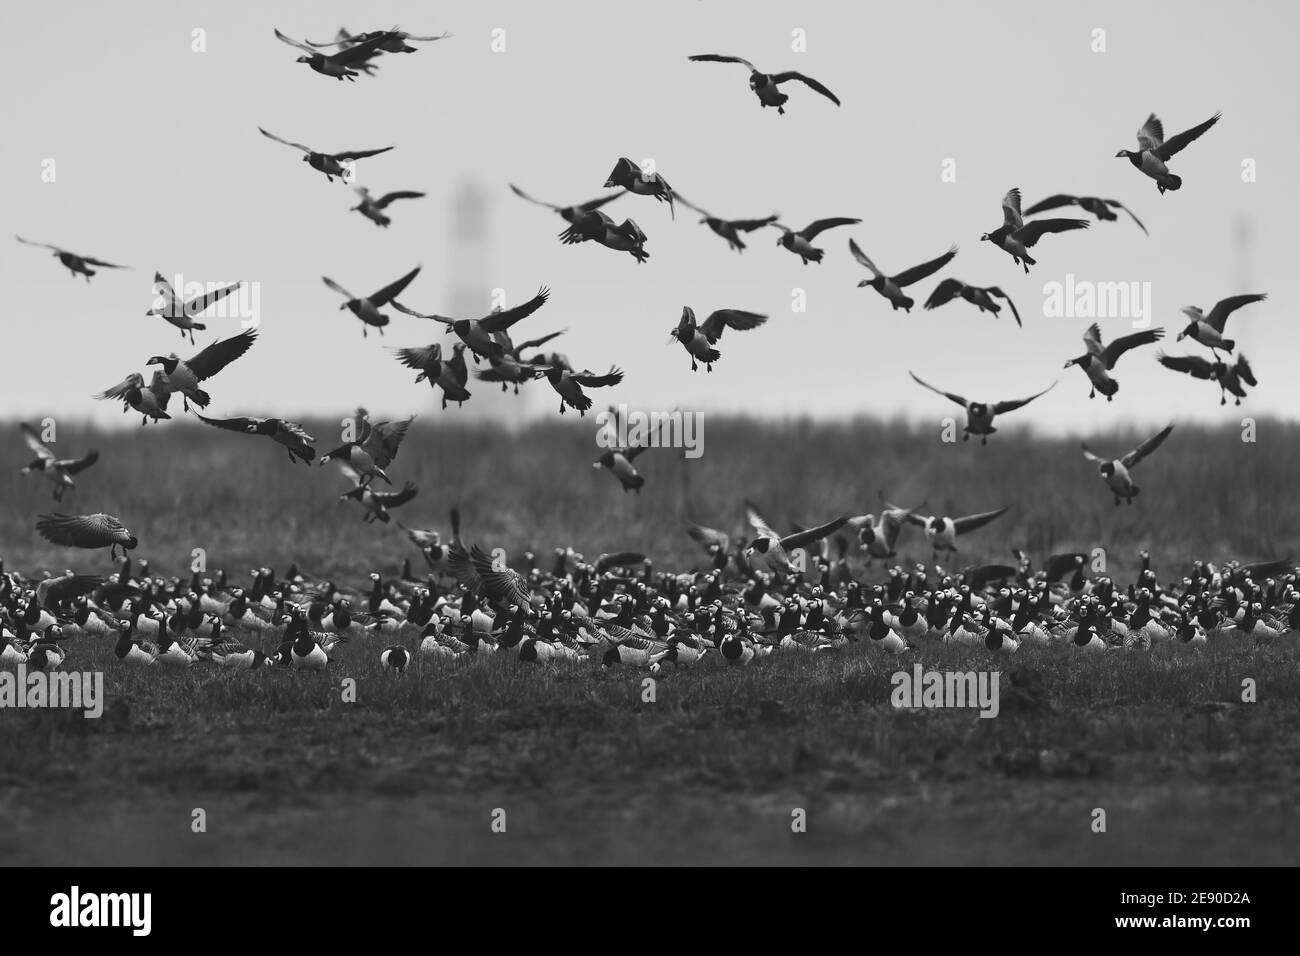 Grayscale shot of a beautiful flock of flying birds over the field Stock Photo